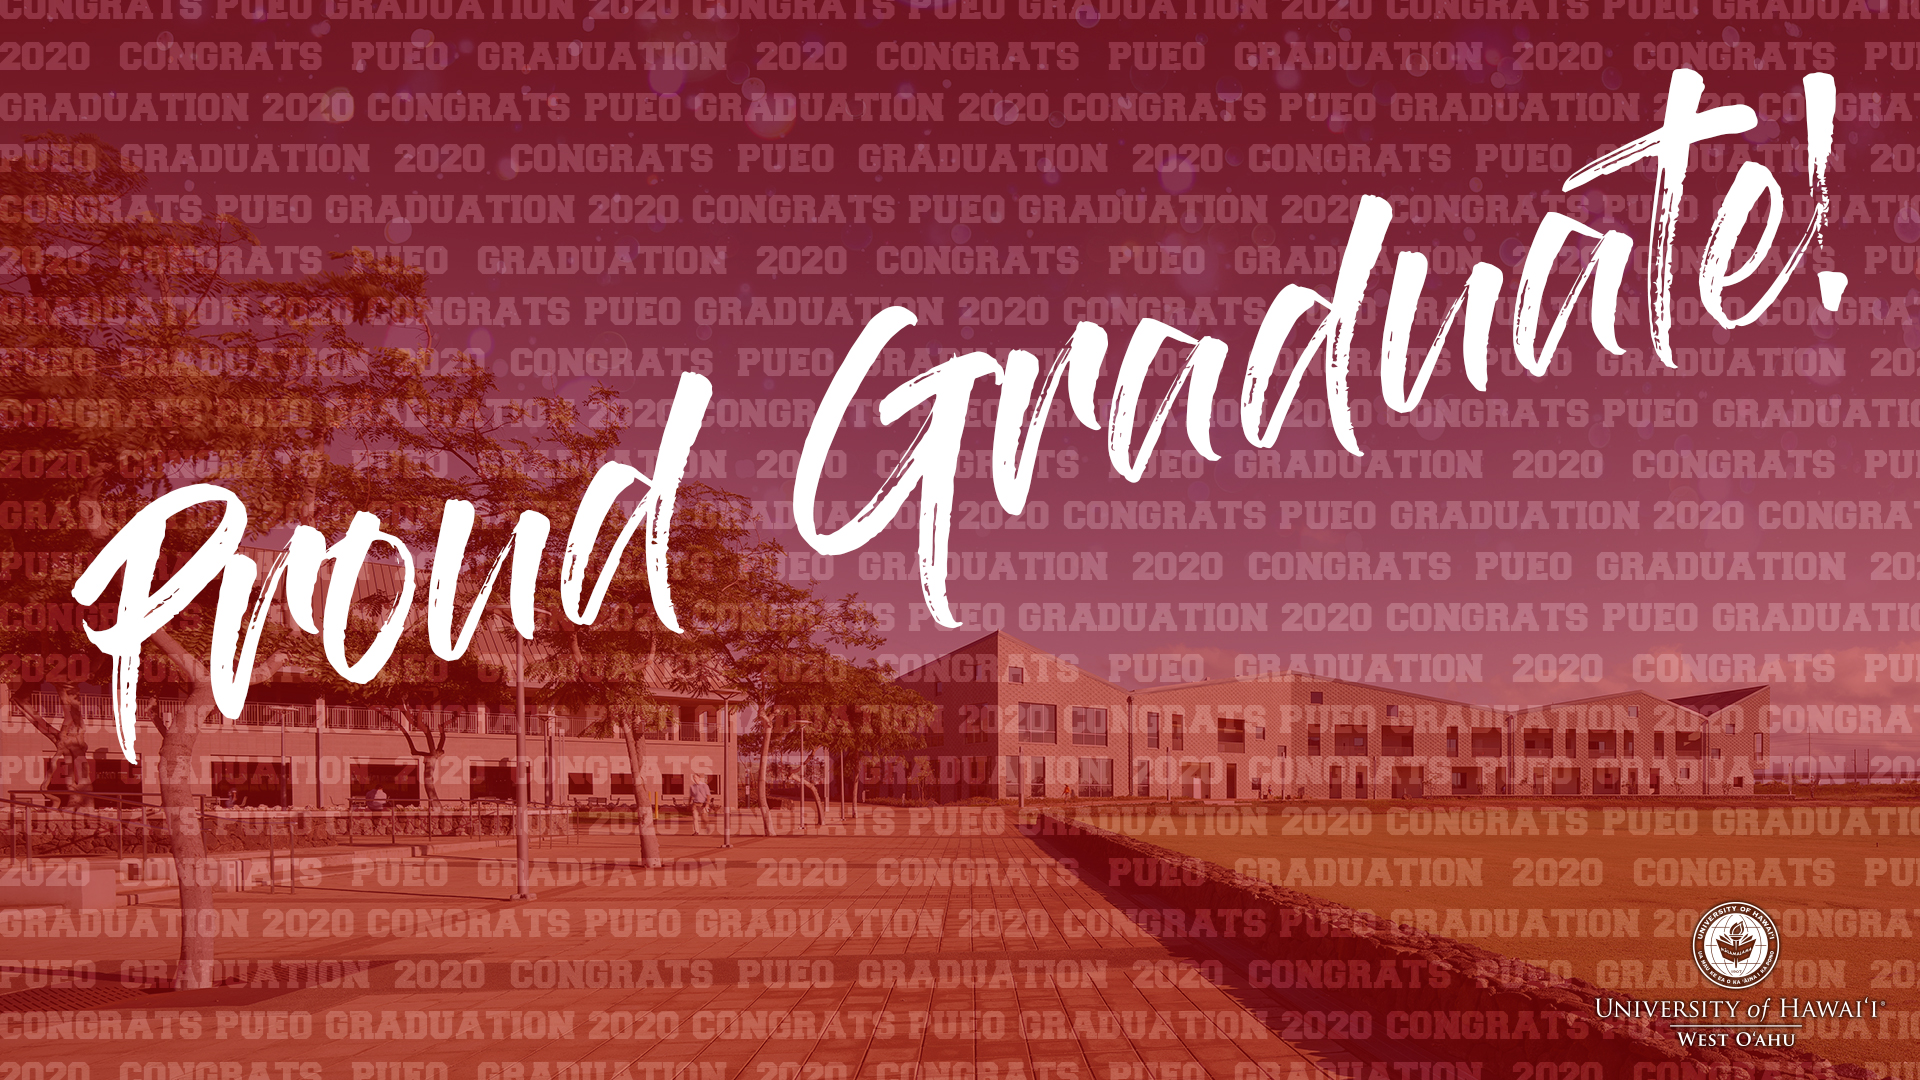 Zoom background image that says Proud Graduate.